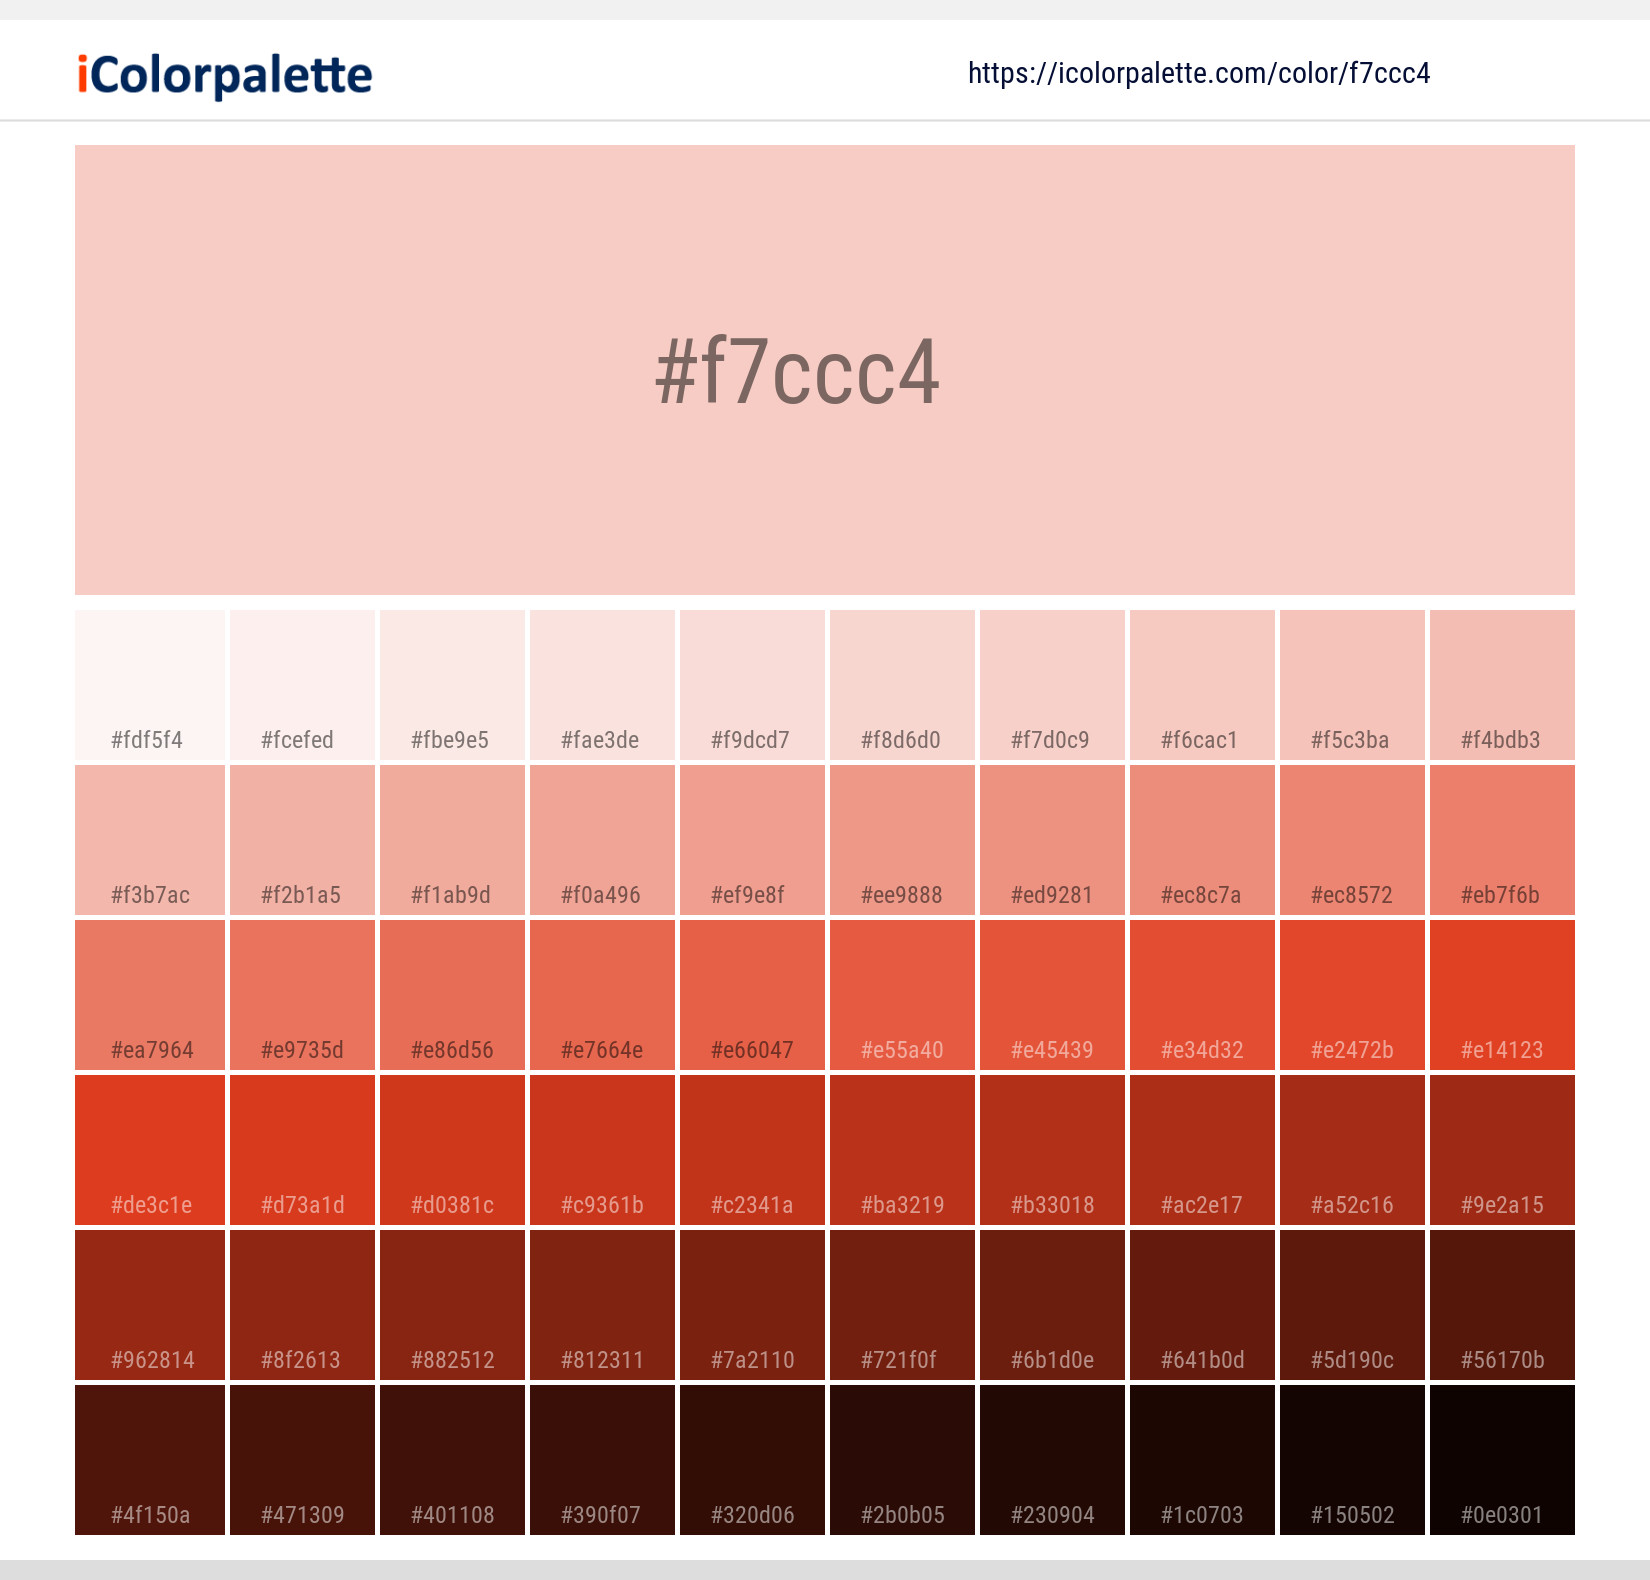 https://www.icolorpalette.com/download/shades/f7ccc4_color_shades.jpg